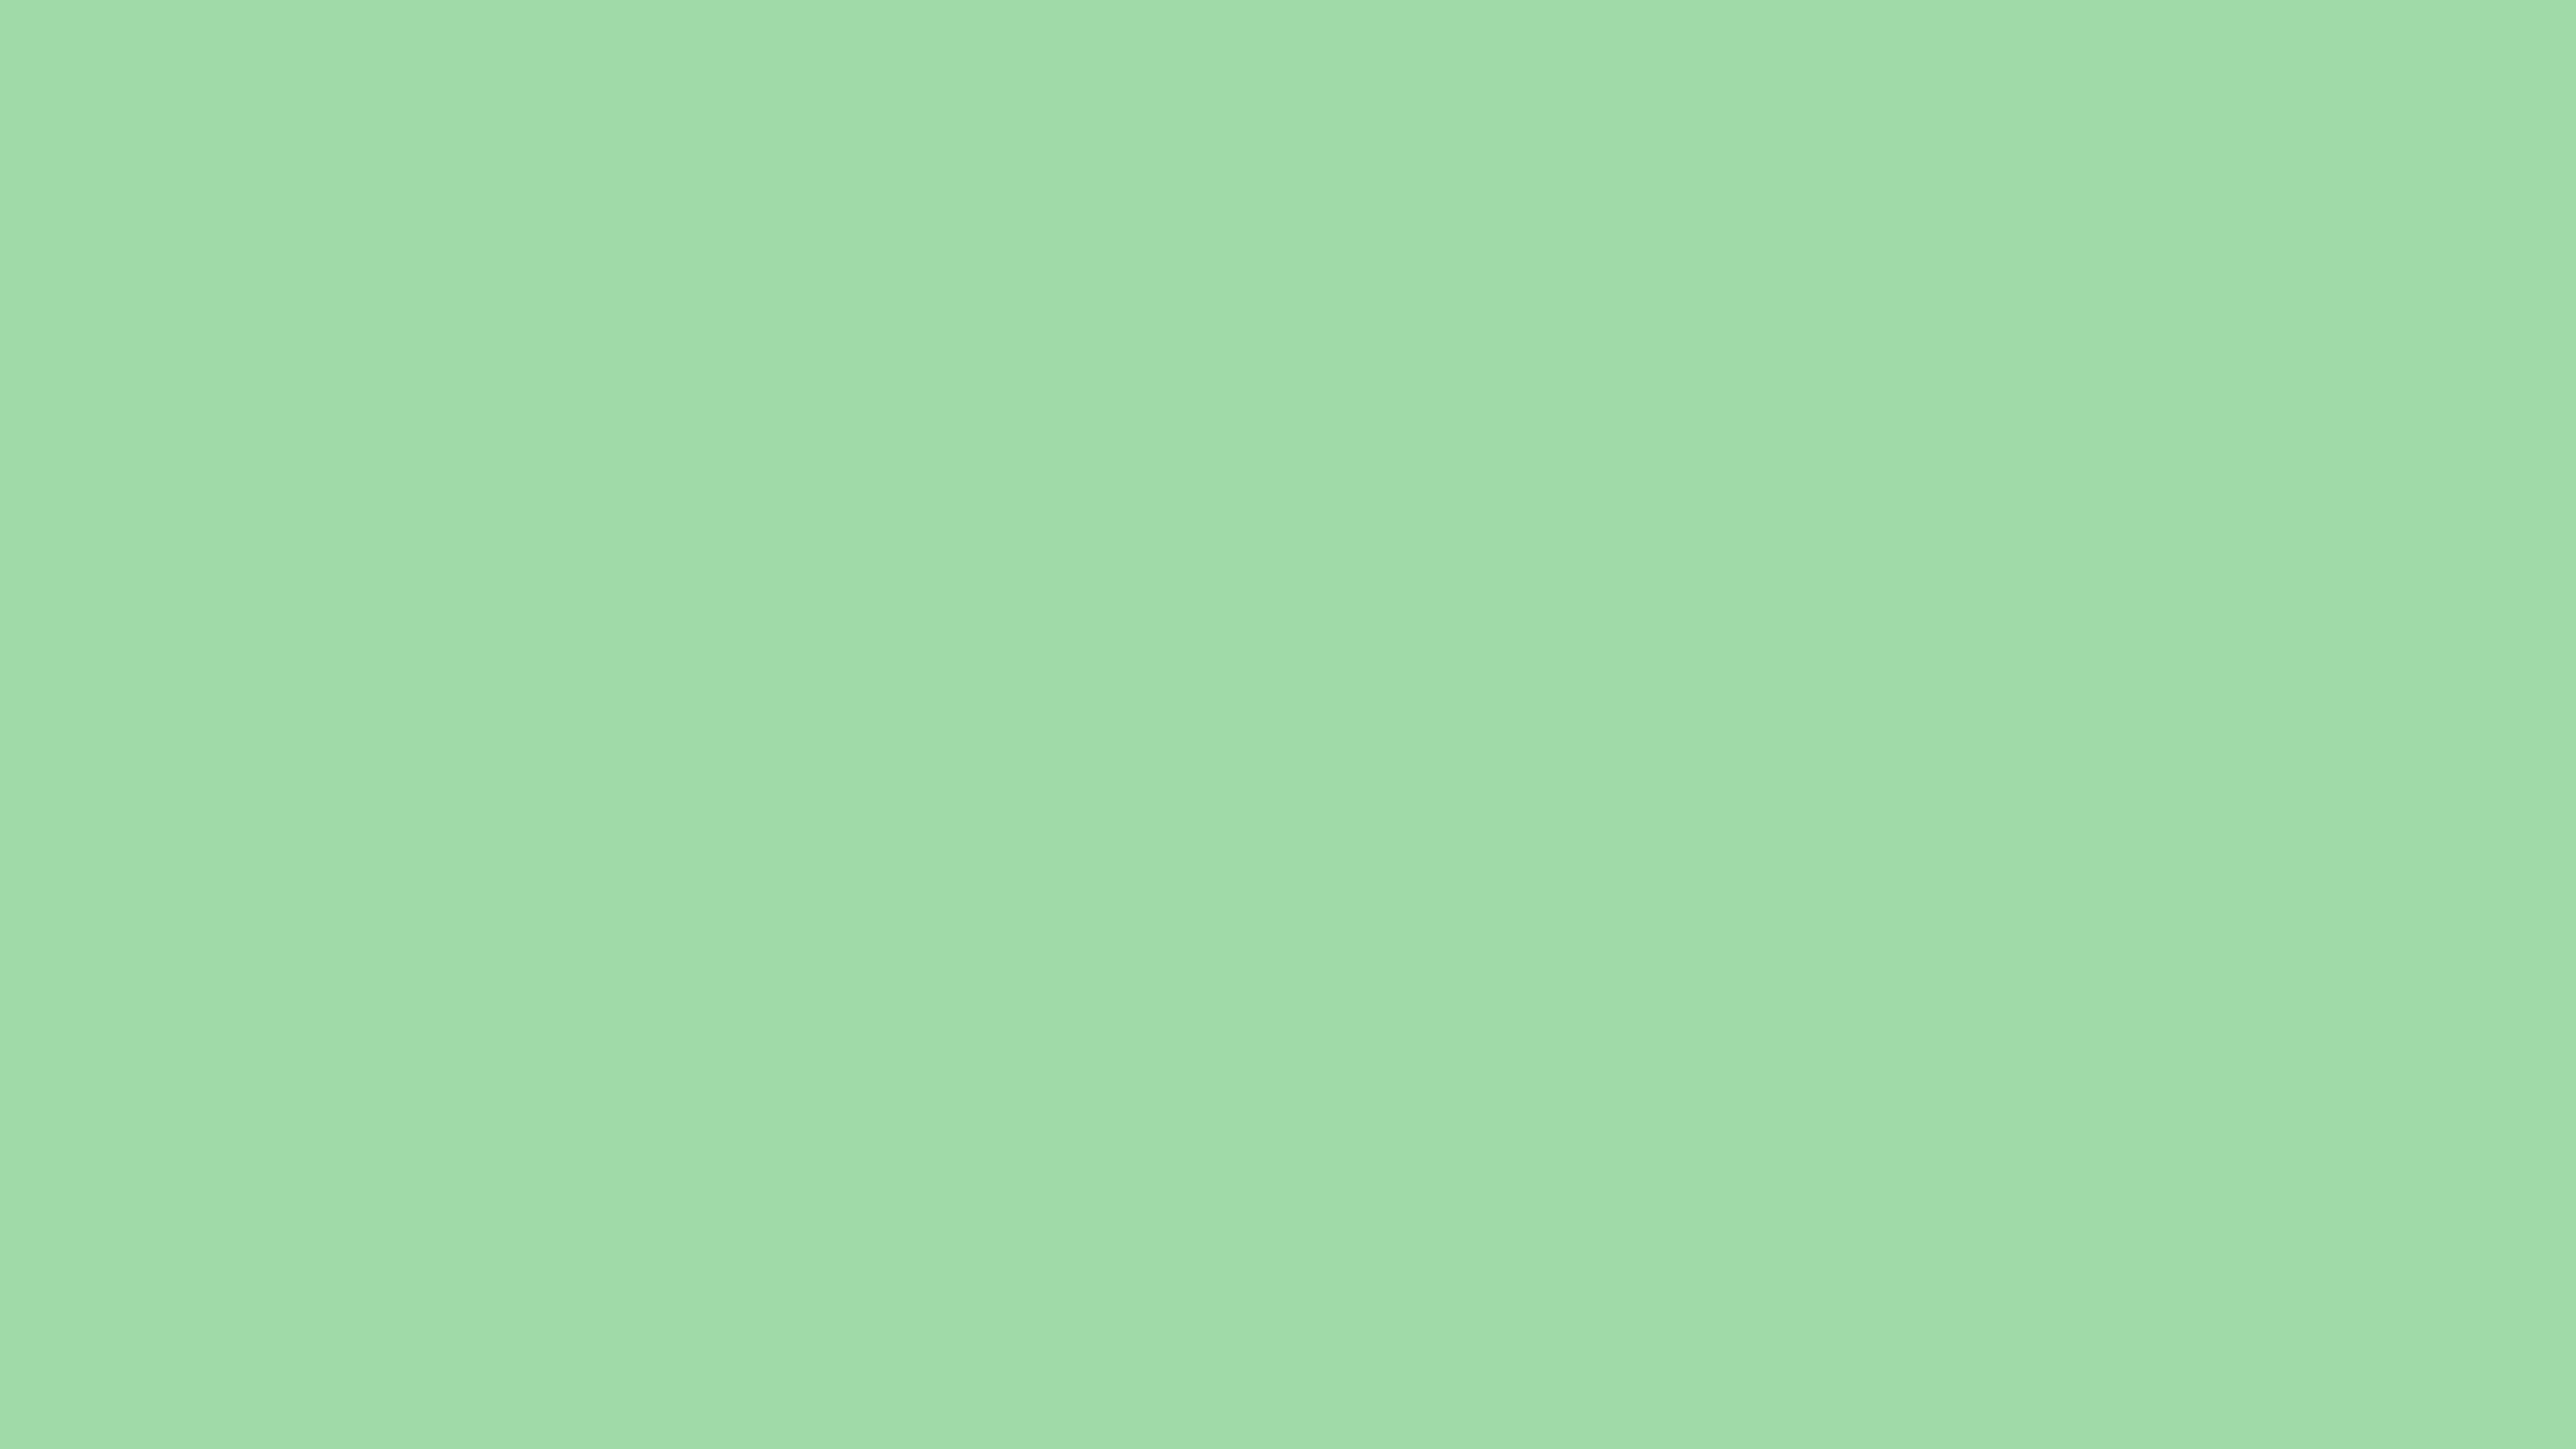 Green Ash Solid Color Background Image | Free Image Generator